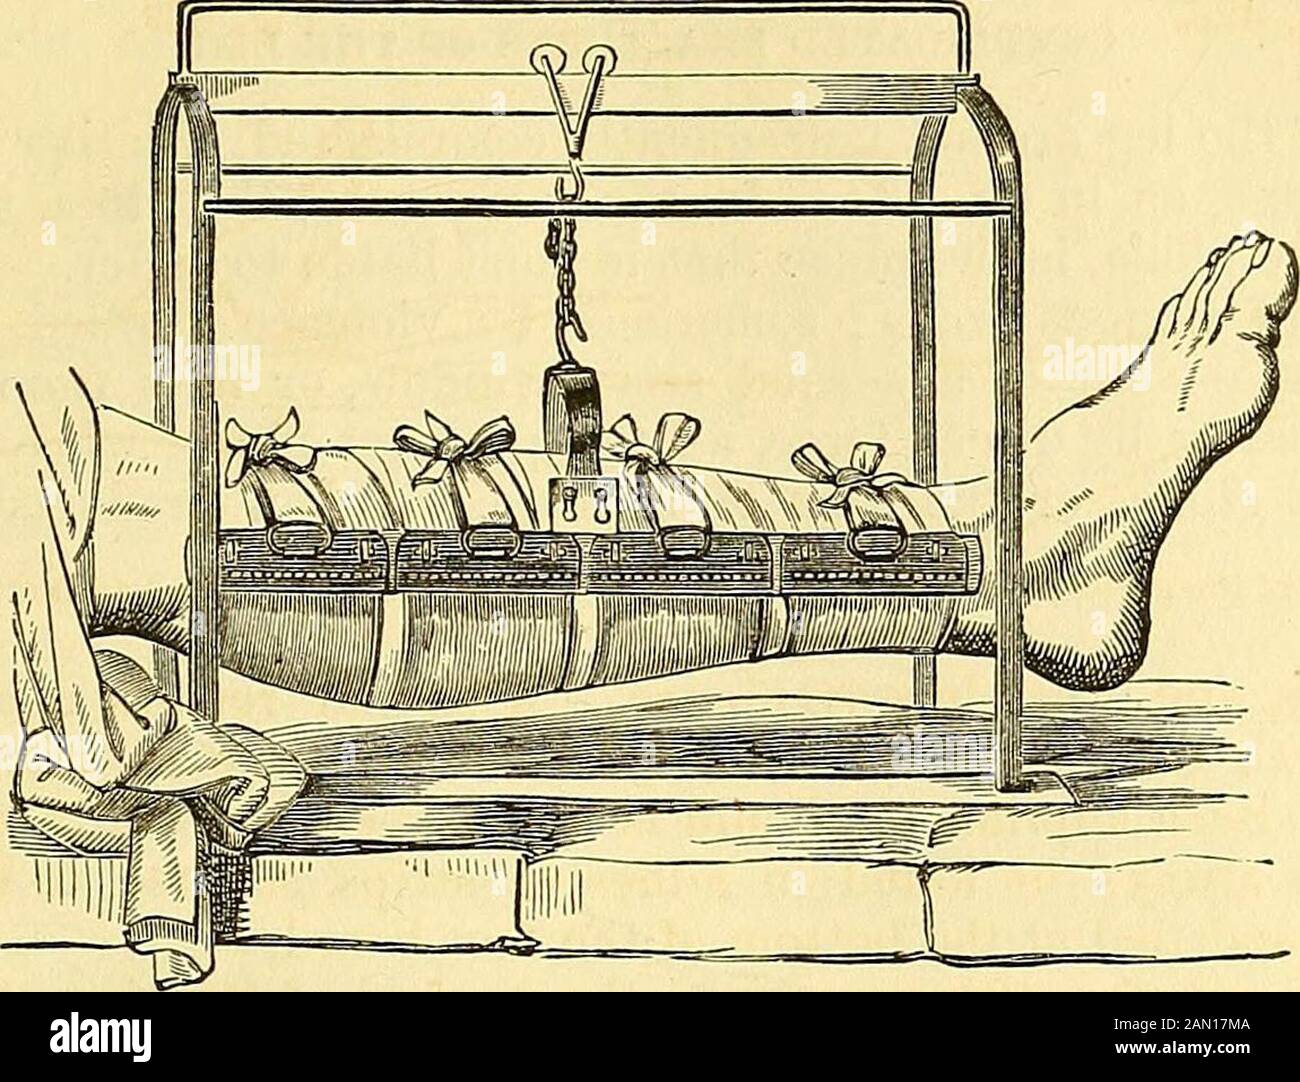 A system of surgery : pathological, diagnostic, therapeutic, and operative . ension. If, after the apparatus has been applied, the limbis not sufficiently steady, adhesive strips must be used, as represented in the en- graving Suspension of the leg may sometimes be advantageously practised, both as itrespects the comfort of the patient and the welfare of the fracture. It may bedone according to the method recommended, many years ago, by Professor N. E.Smith, or the very simple contrivance of Mr. Salter, of England, depicted in fig.432, representing the limb surrounded by the apparatus and slun Stock Photo